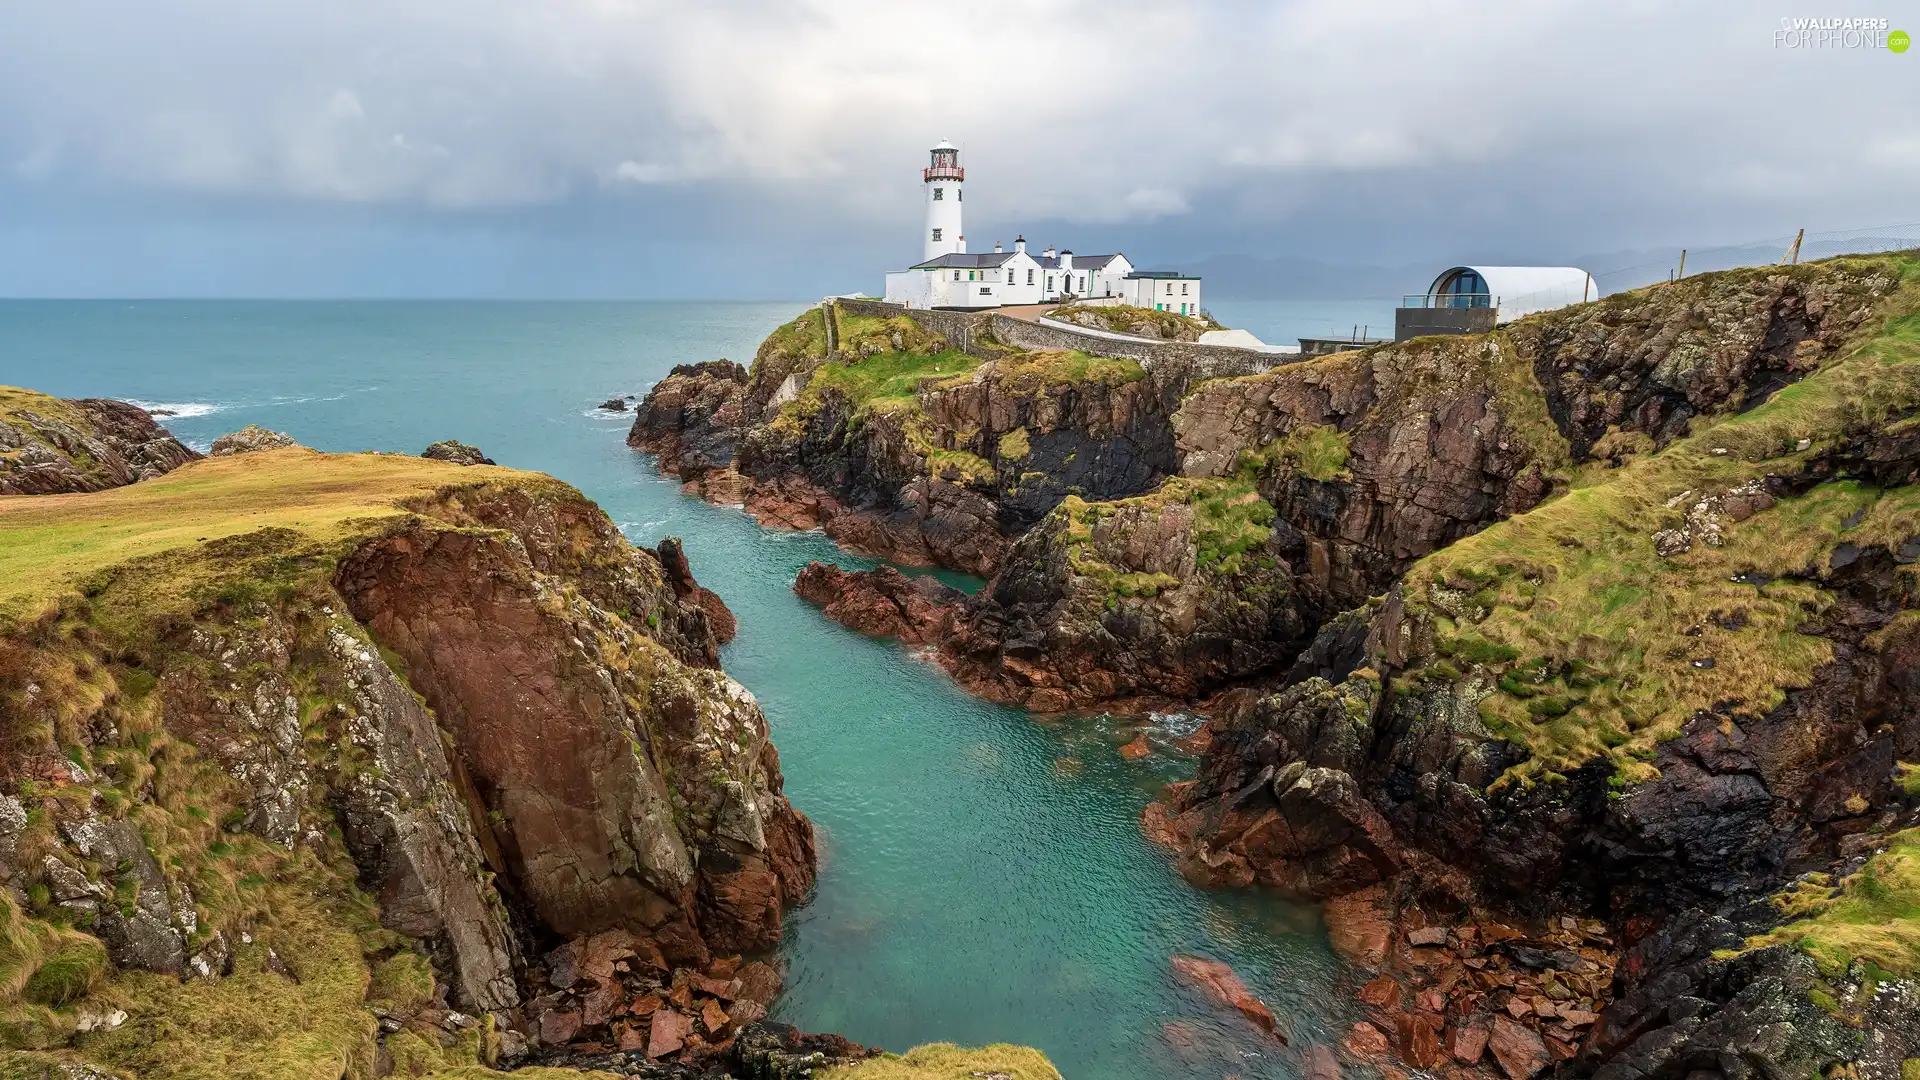 Fanad Head Lighthouse, rocks, Ireland, clouds, County Donegal, Lighthouses, sea, Portsalon